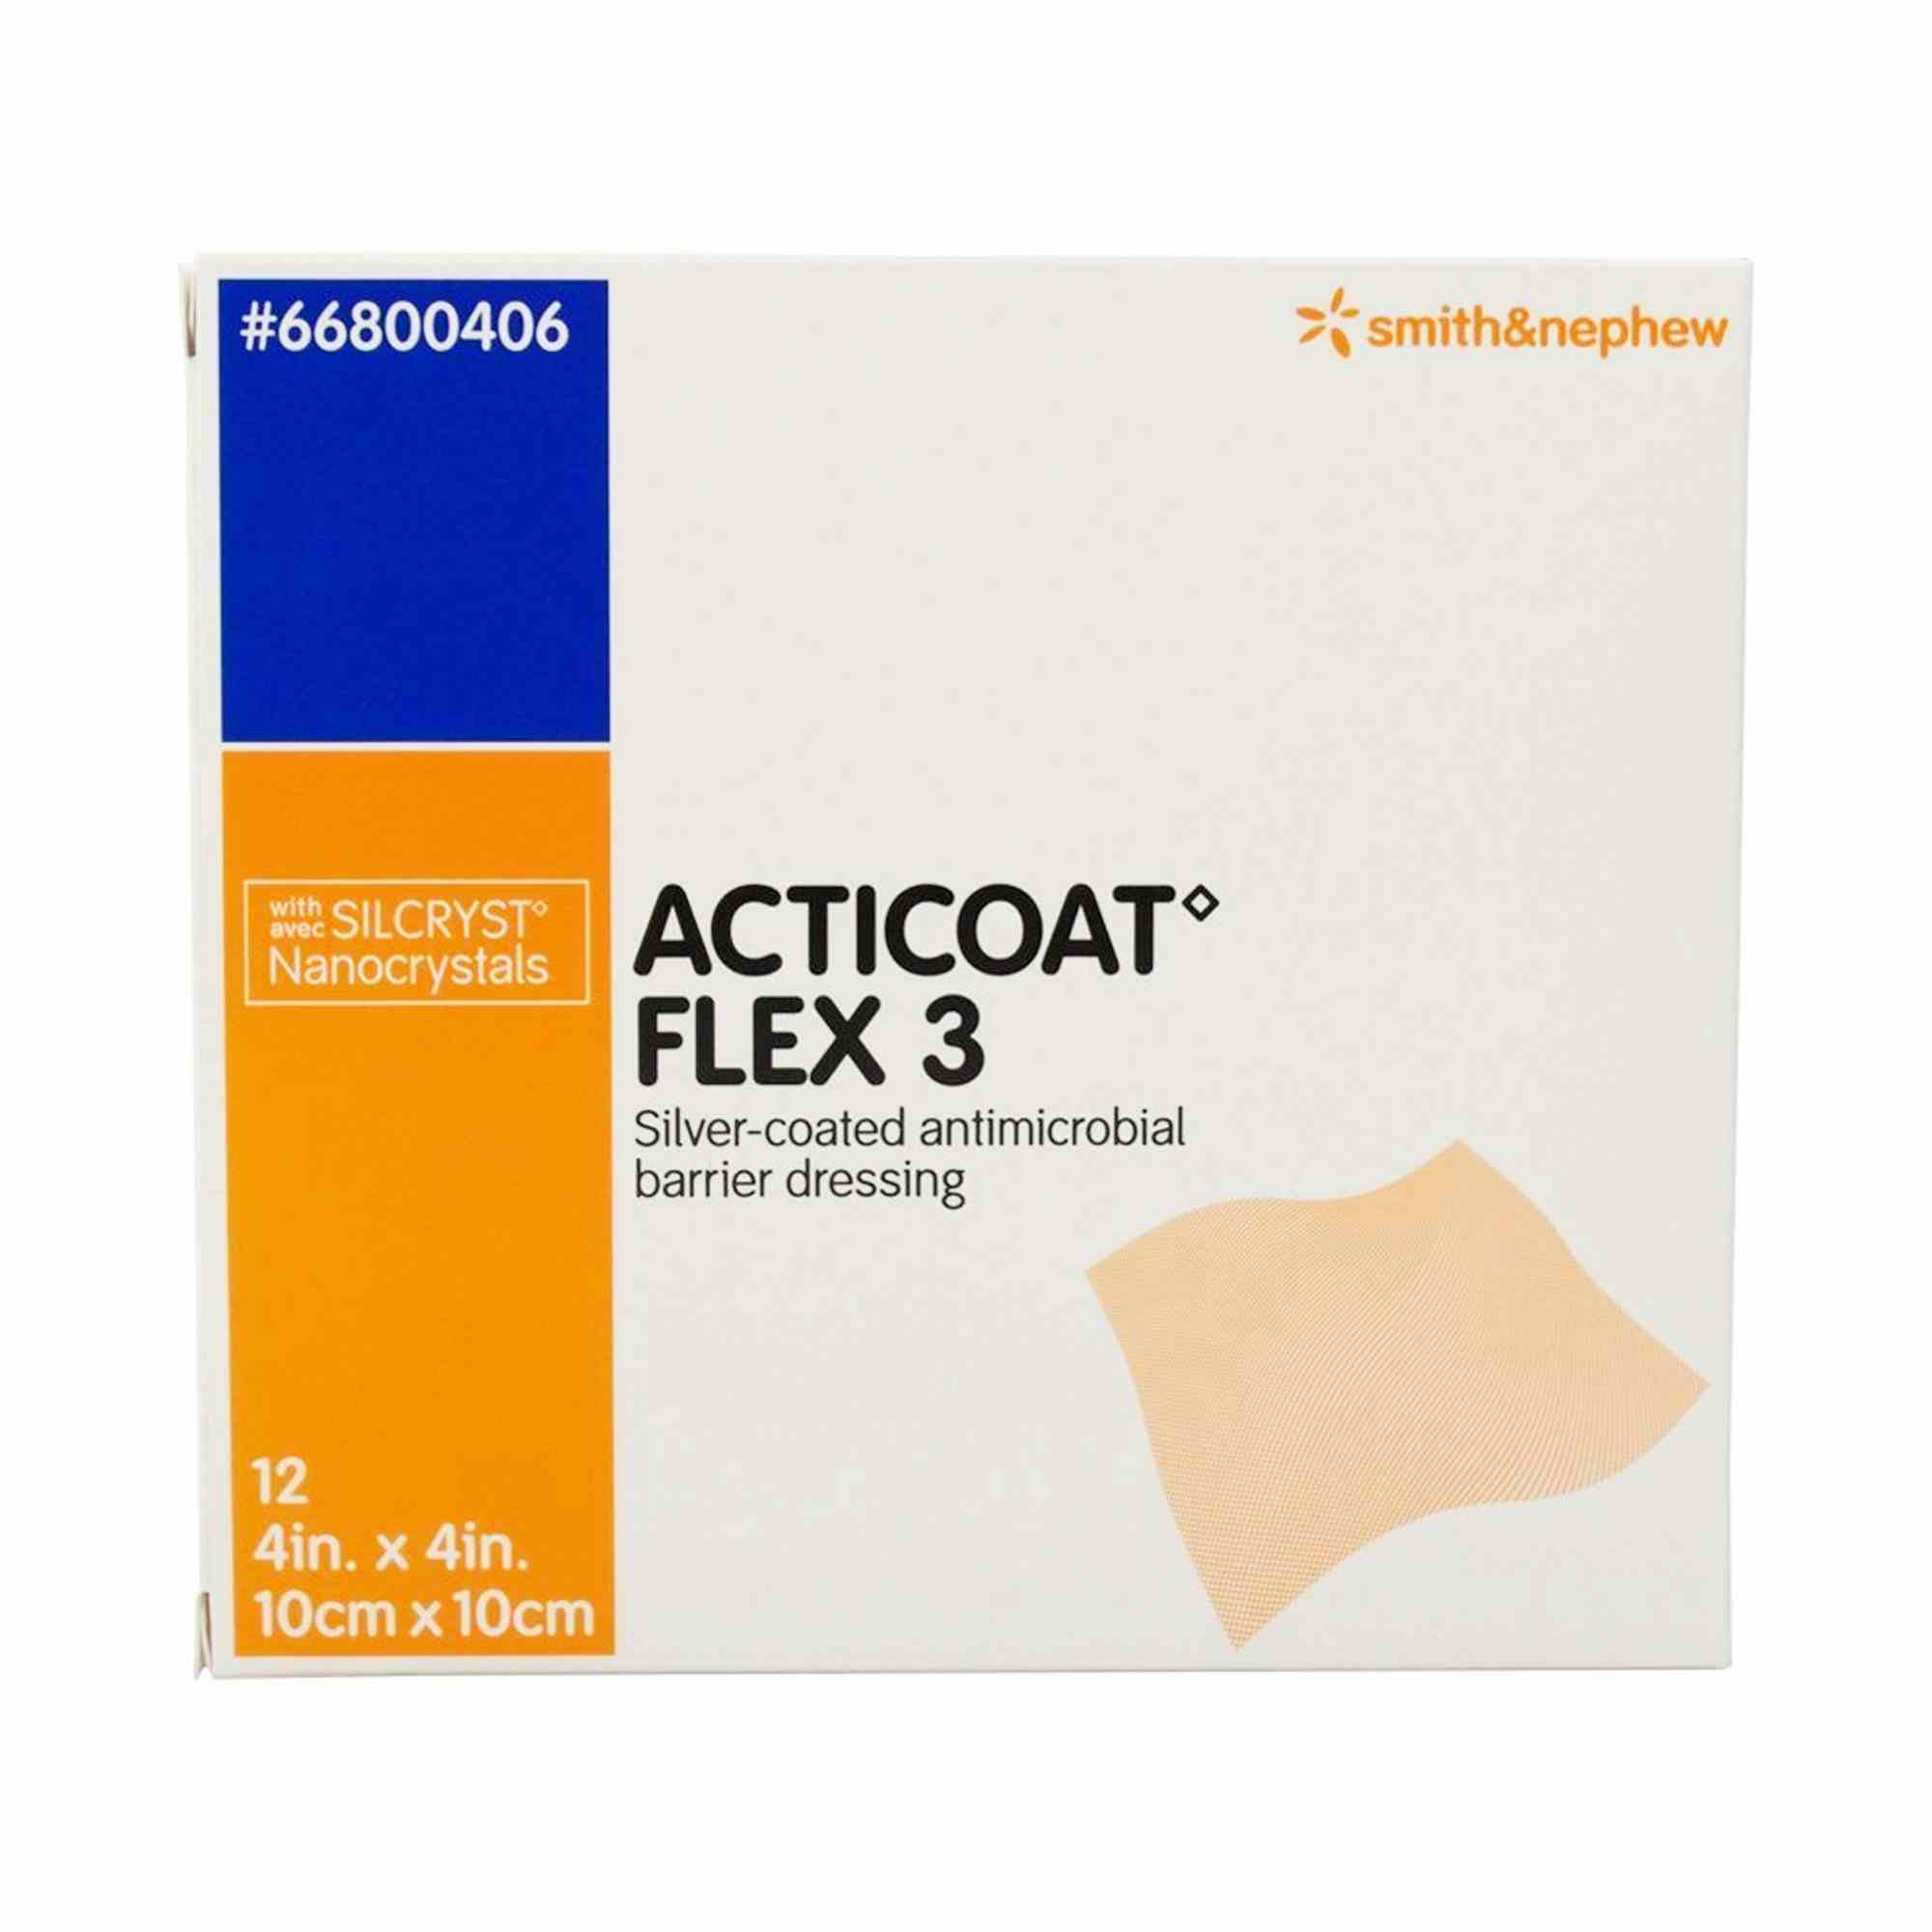 Acticoat Flex 3 Silver-coated Antimicrobial Barrier Dressing, 4 X 4", 66800406, Box of 12